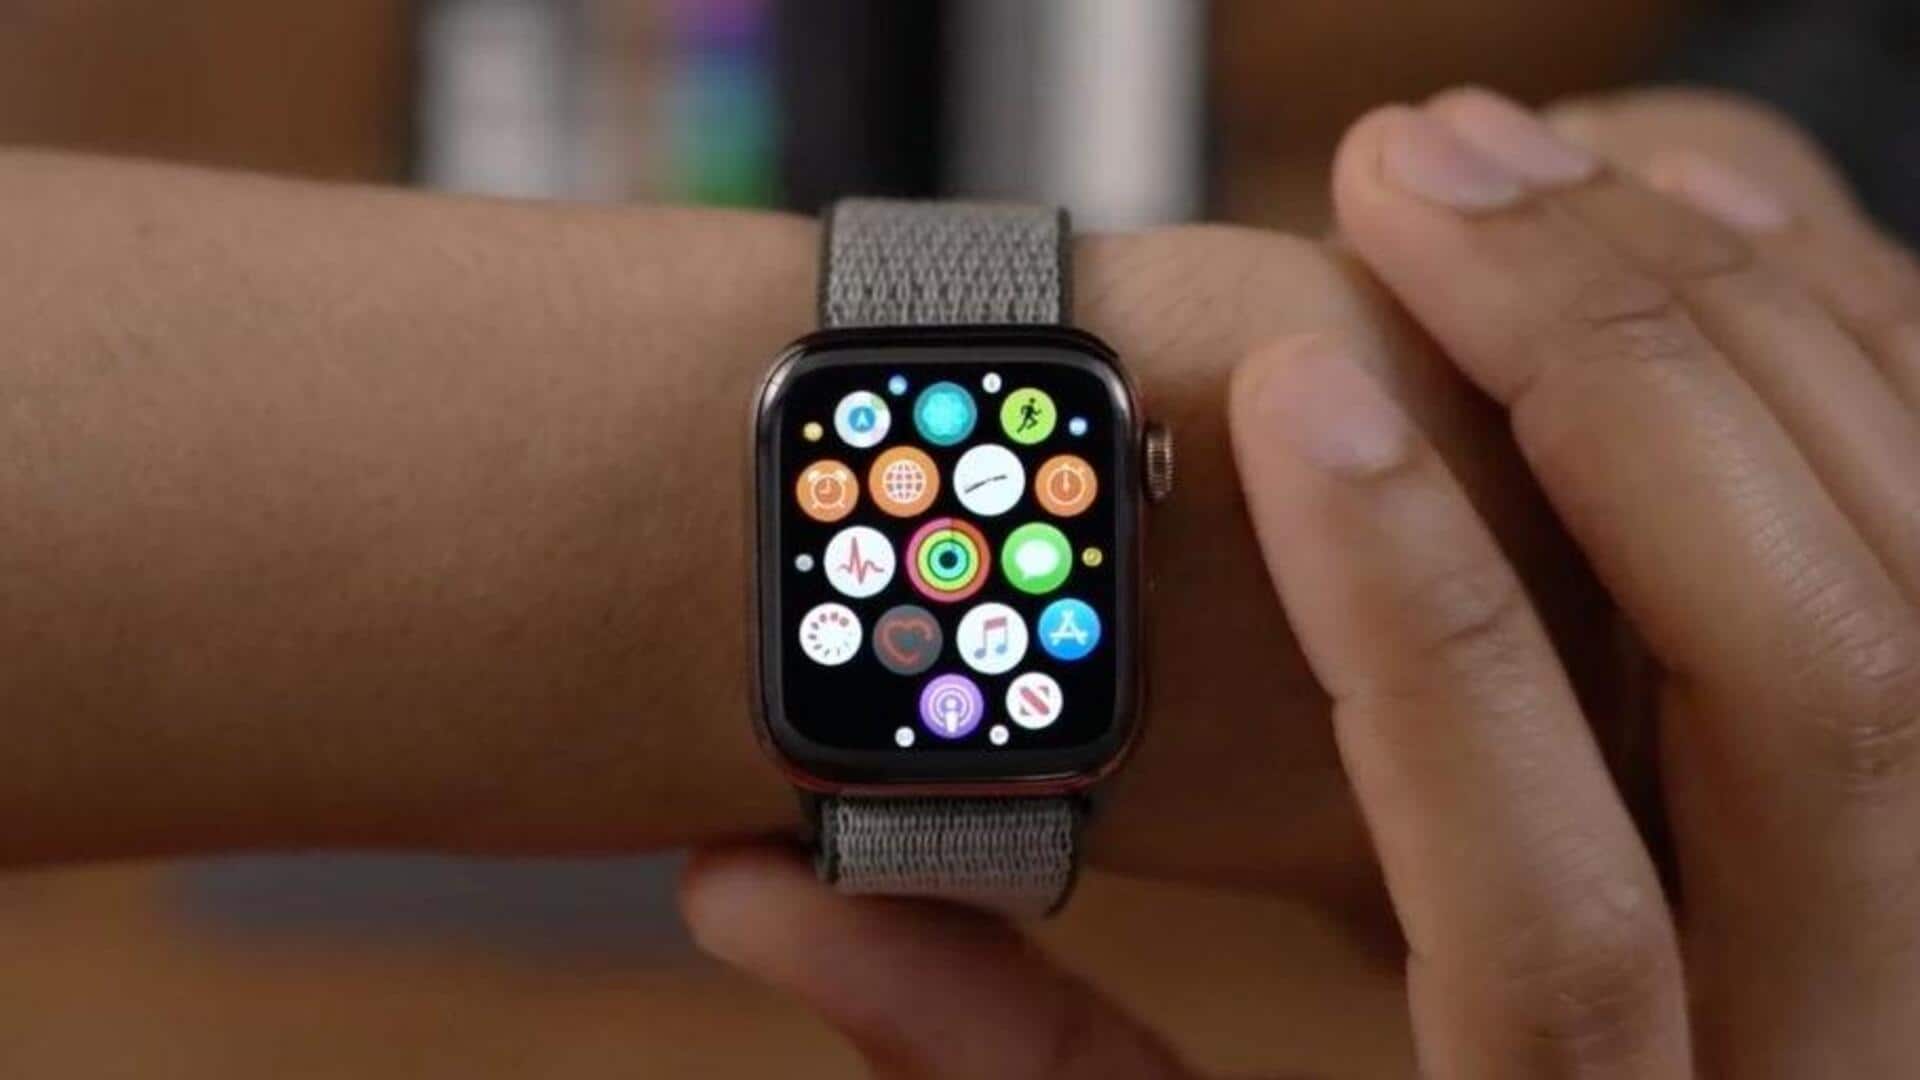 Apple to remove blood-oxygen feature from smartwatches to avoid ban